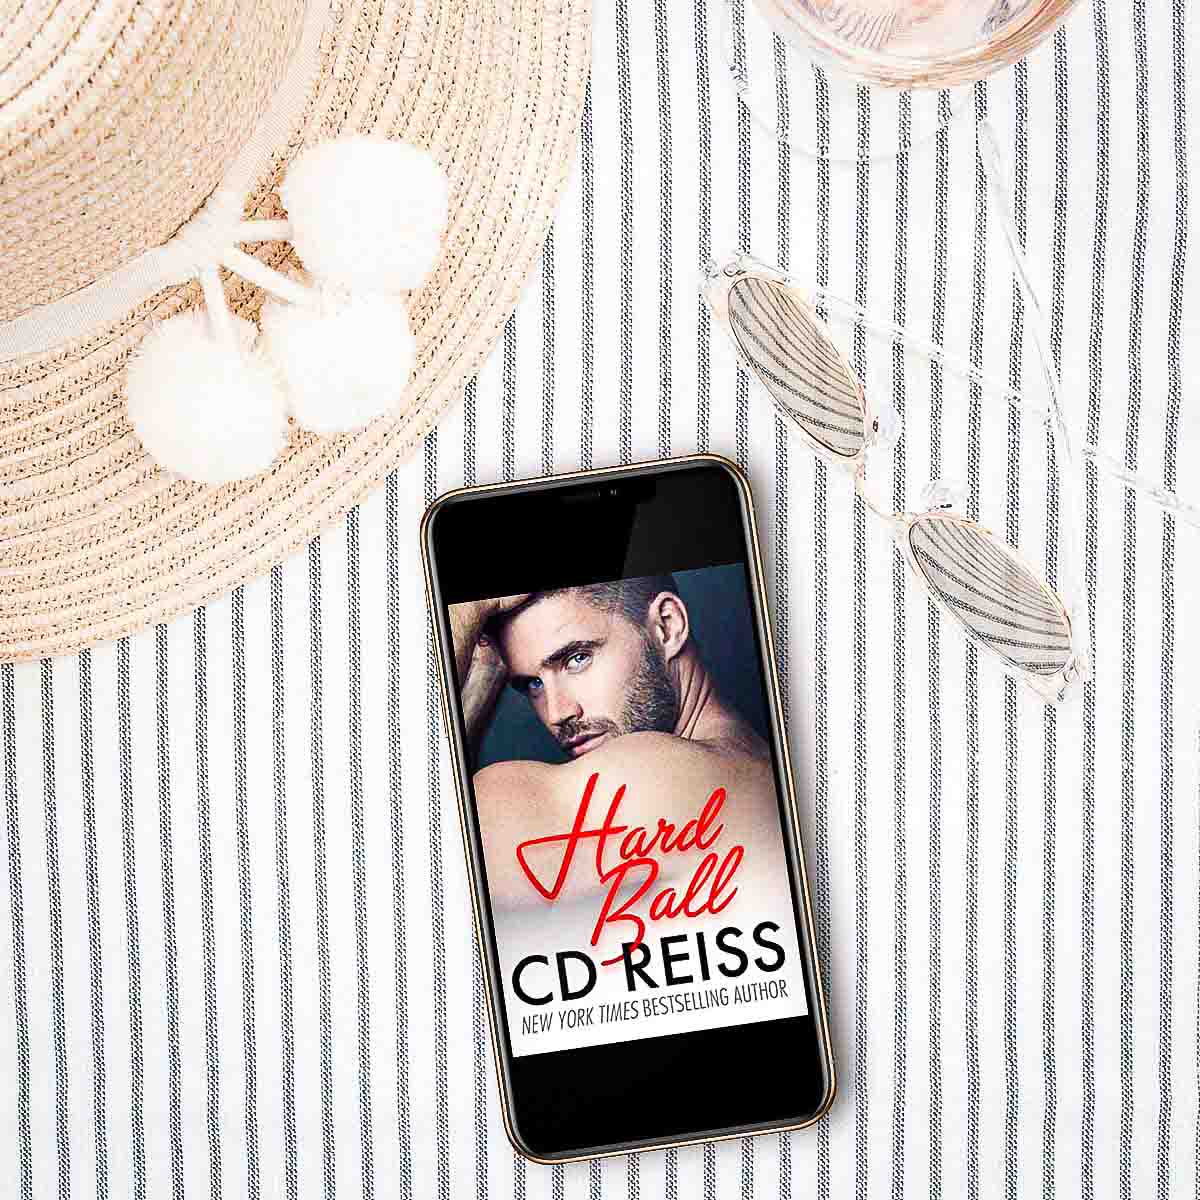 Hardball by CD Reiss gives you an anti-social sports hero who falls in love with an everyday, girl-next-door heroine. Hot and steamy smart sports romance with light angst!